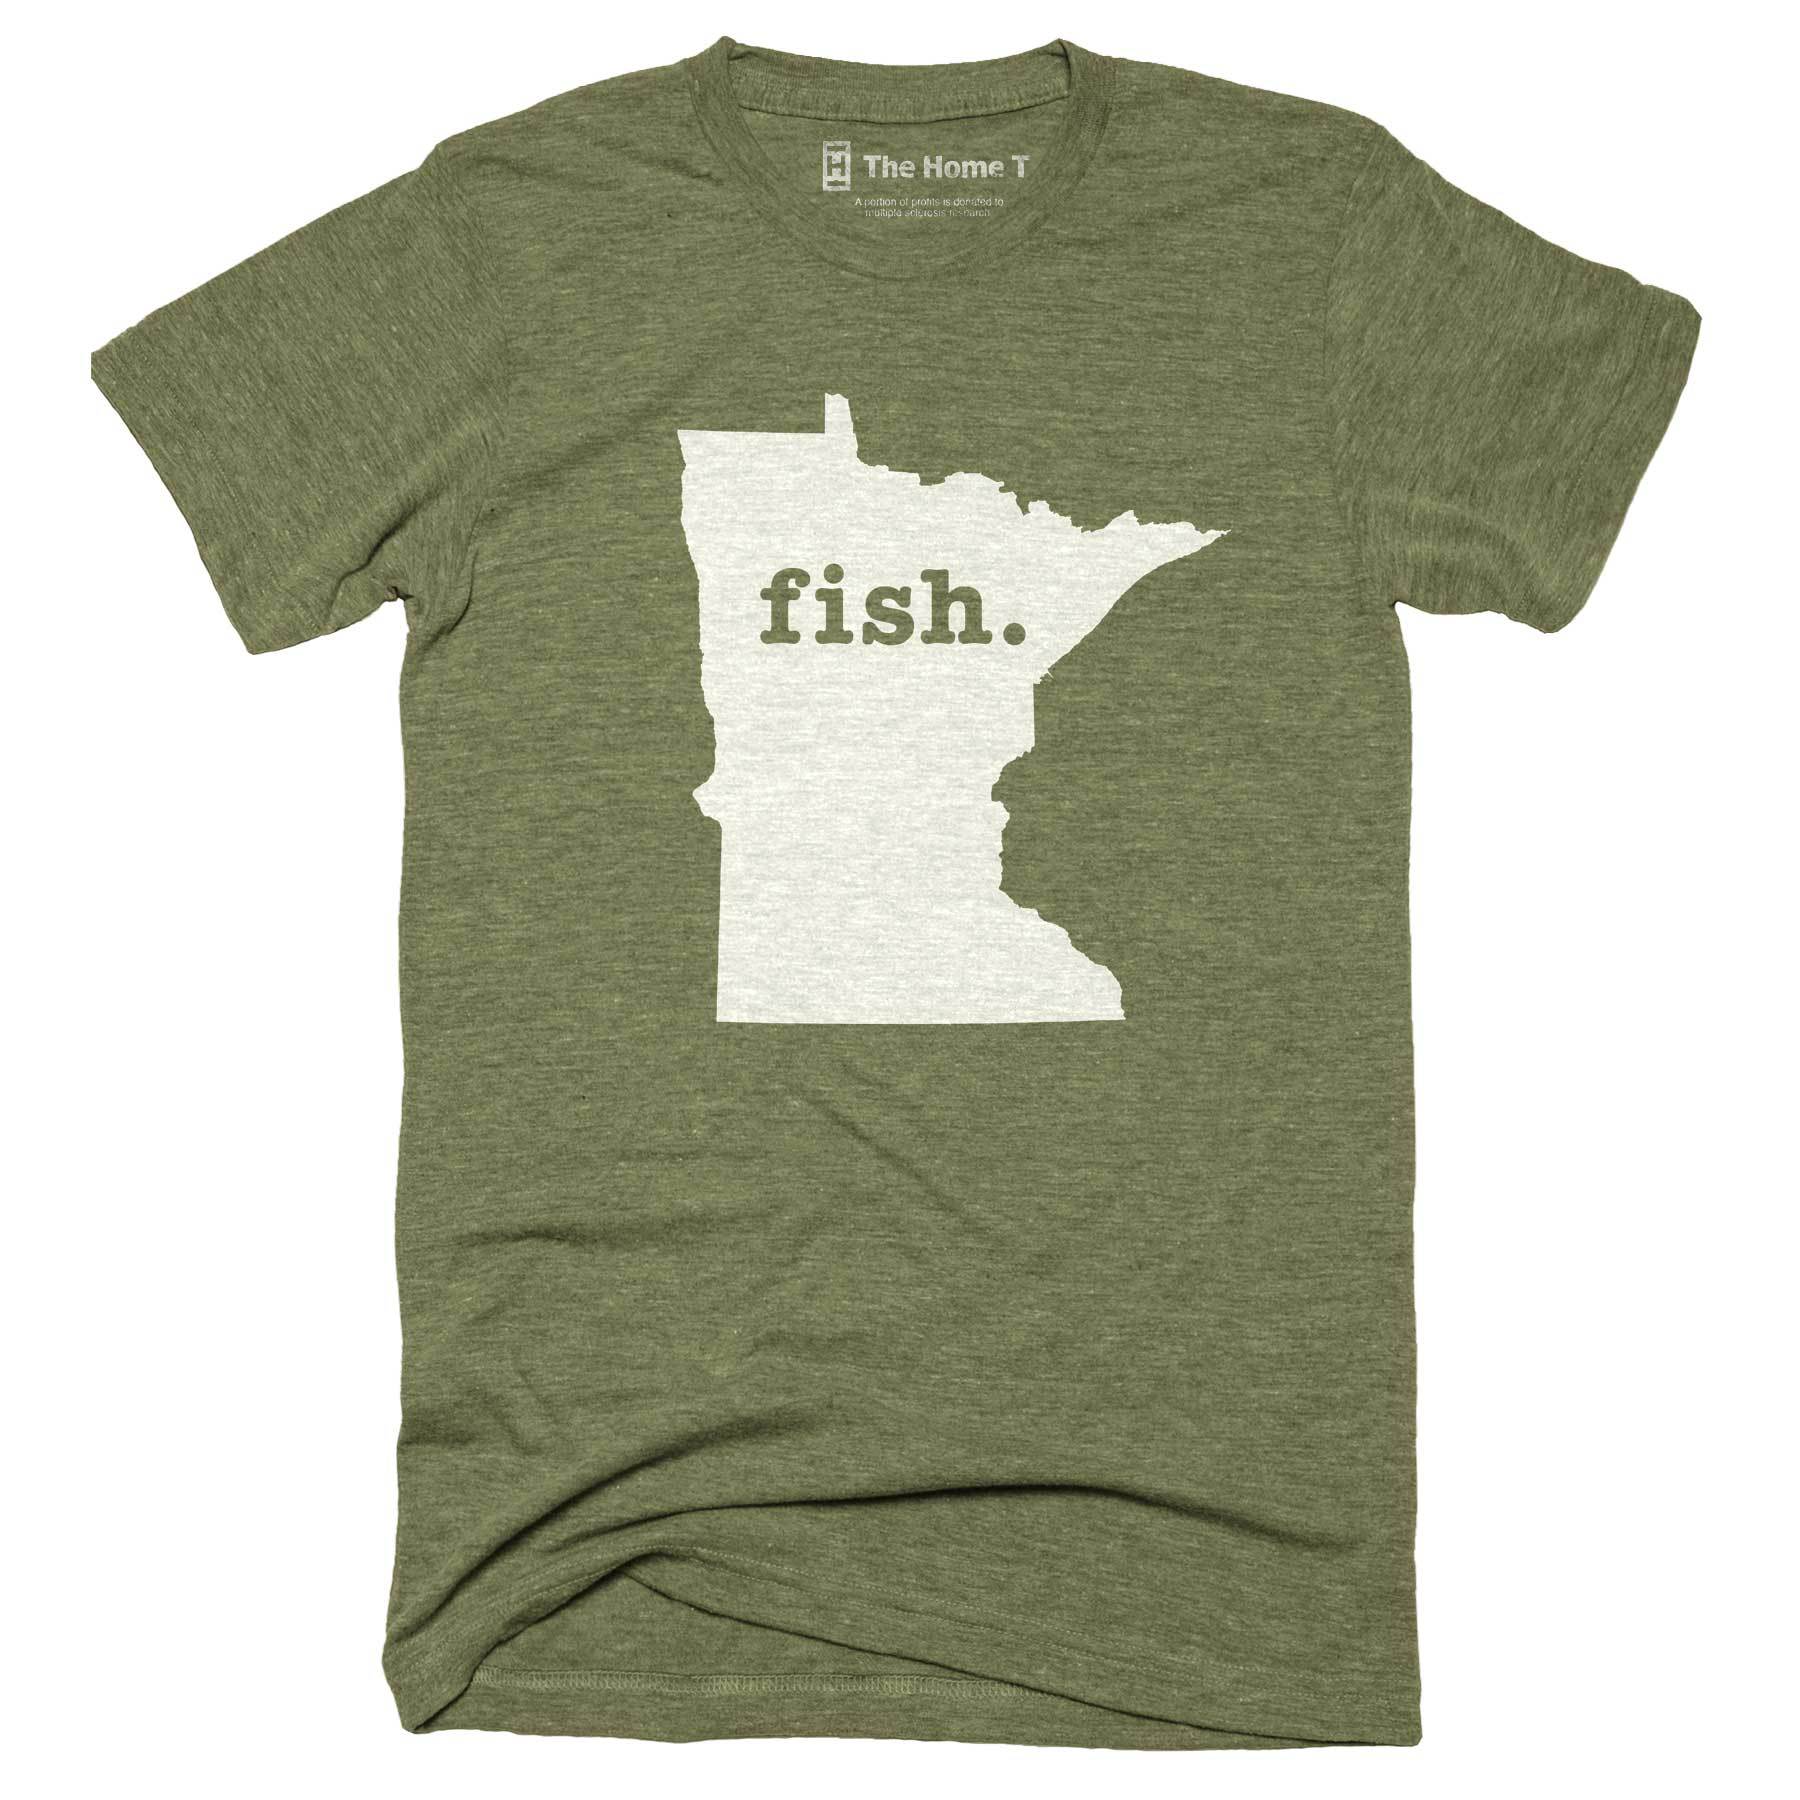 Minnesota Fish Home T-Shirt Outdoor Collection The Home T XXL Army Green